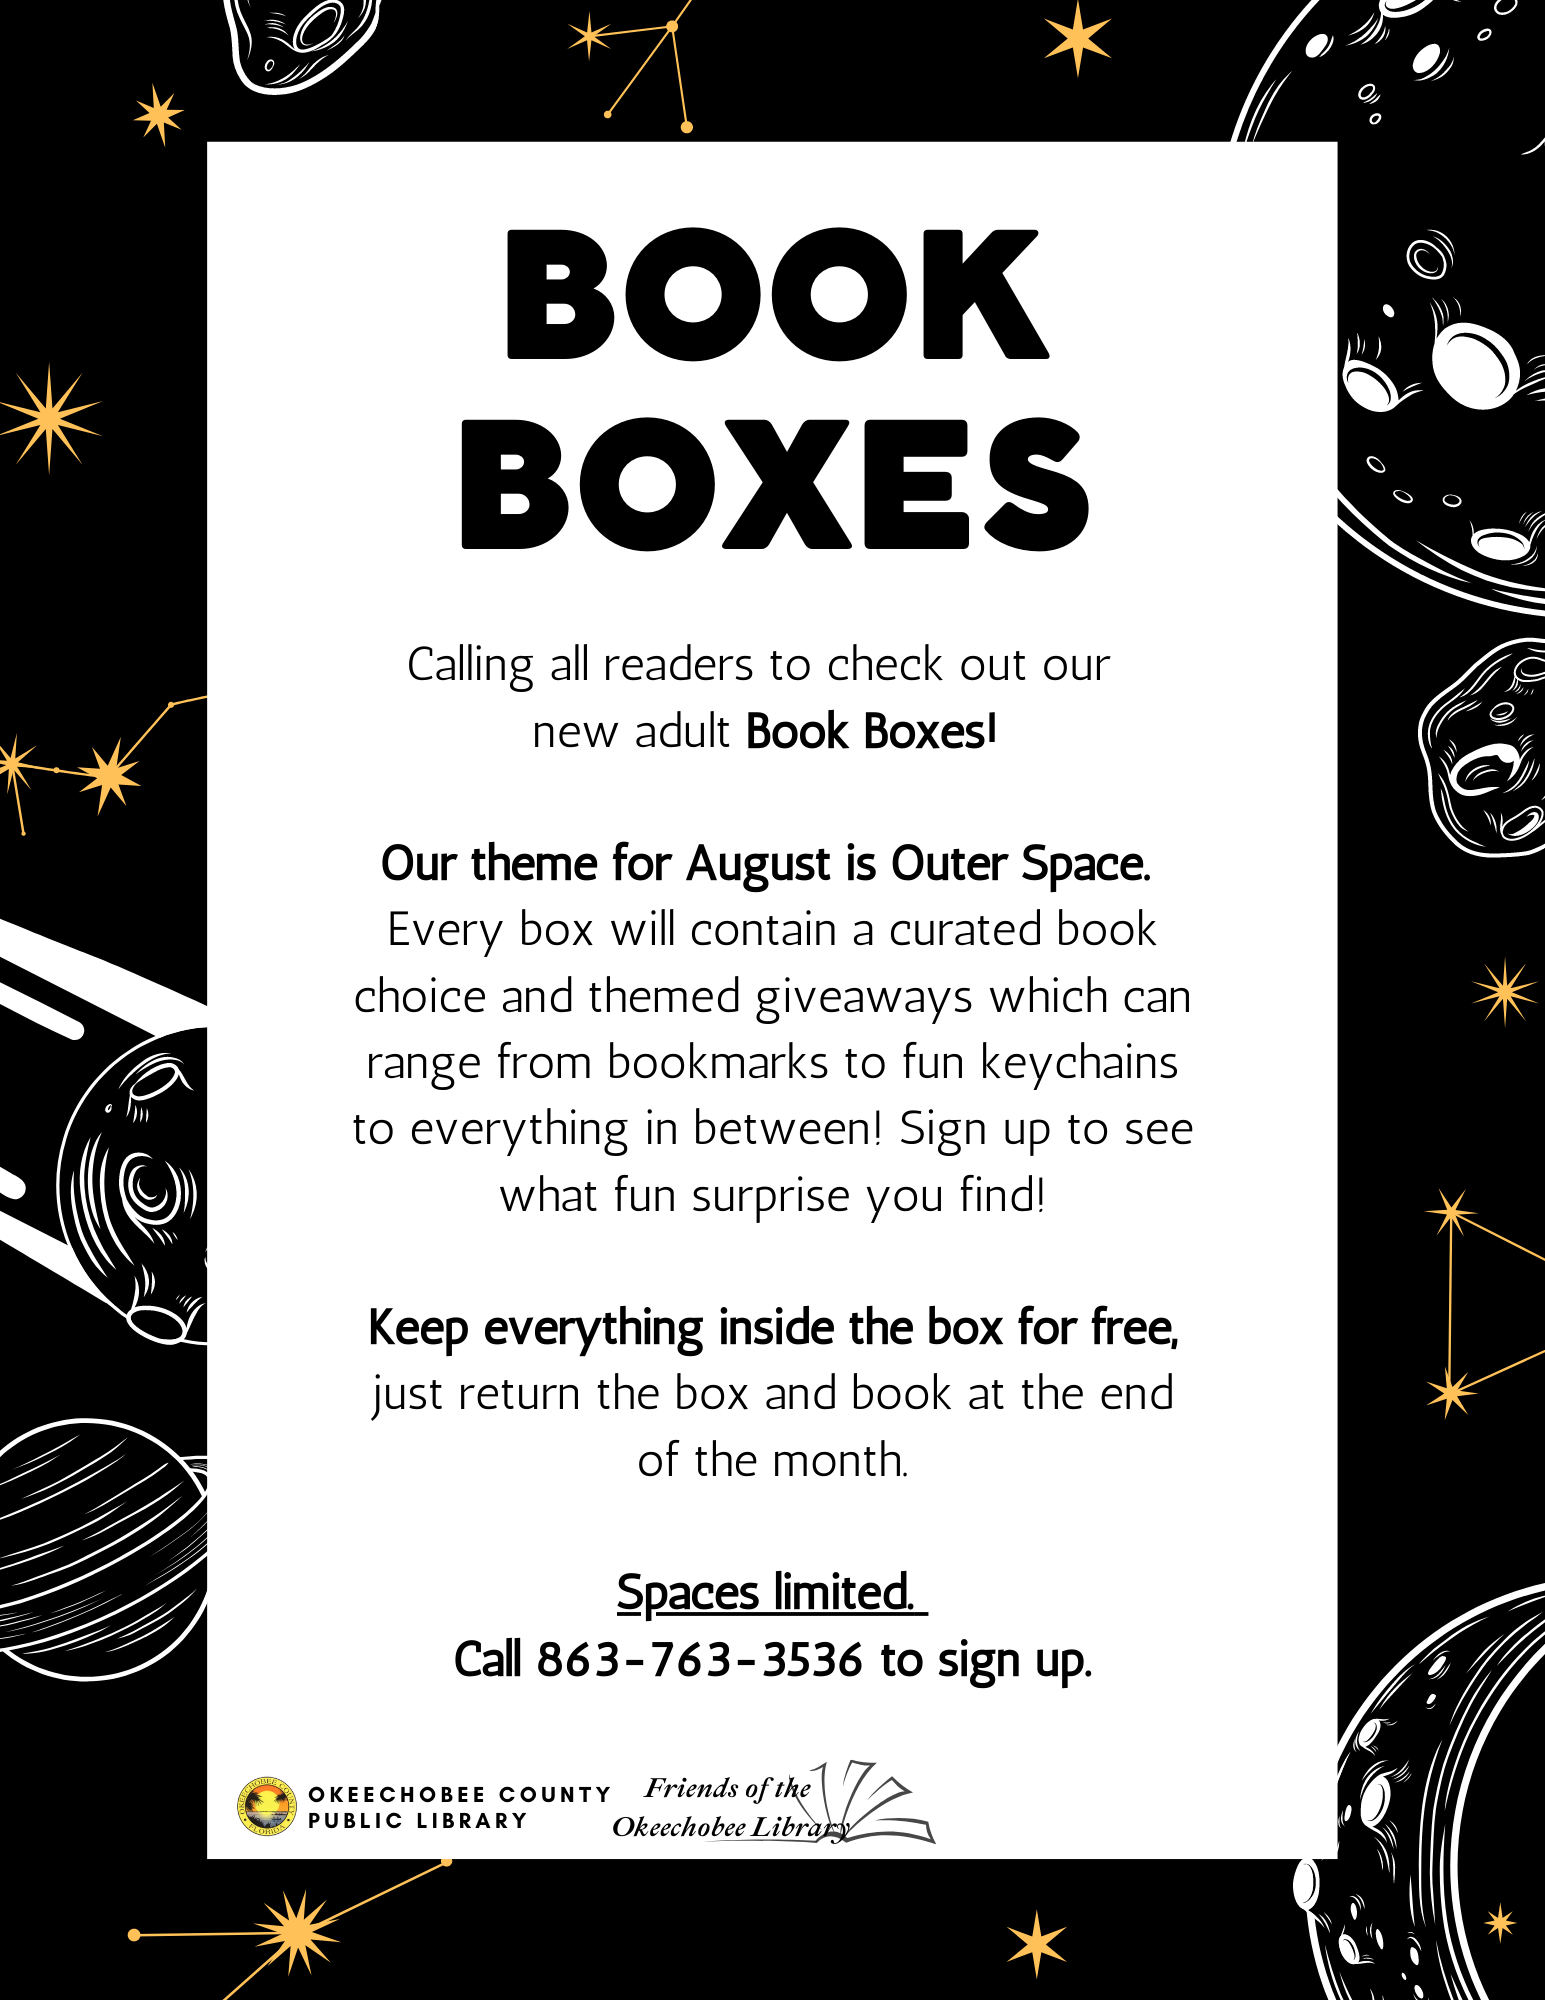 Don't forget to sign up for the August Book Boxes! Every box will contain a curated book choice and themed giveaways which can range from bookmarks to fun keychains to everything in between! Sign up to see what fun surprise you find! SPACES LIMITED. To sign up, call 863-763-3536!"